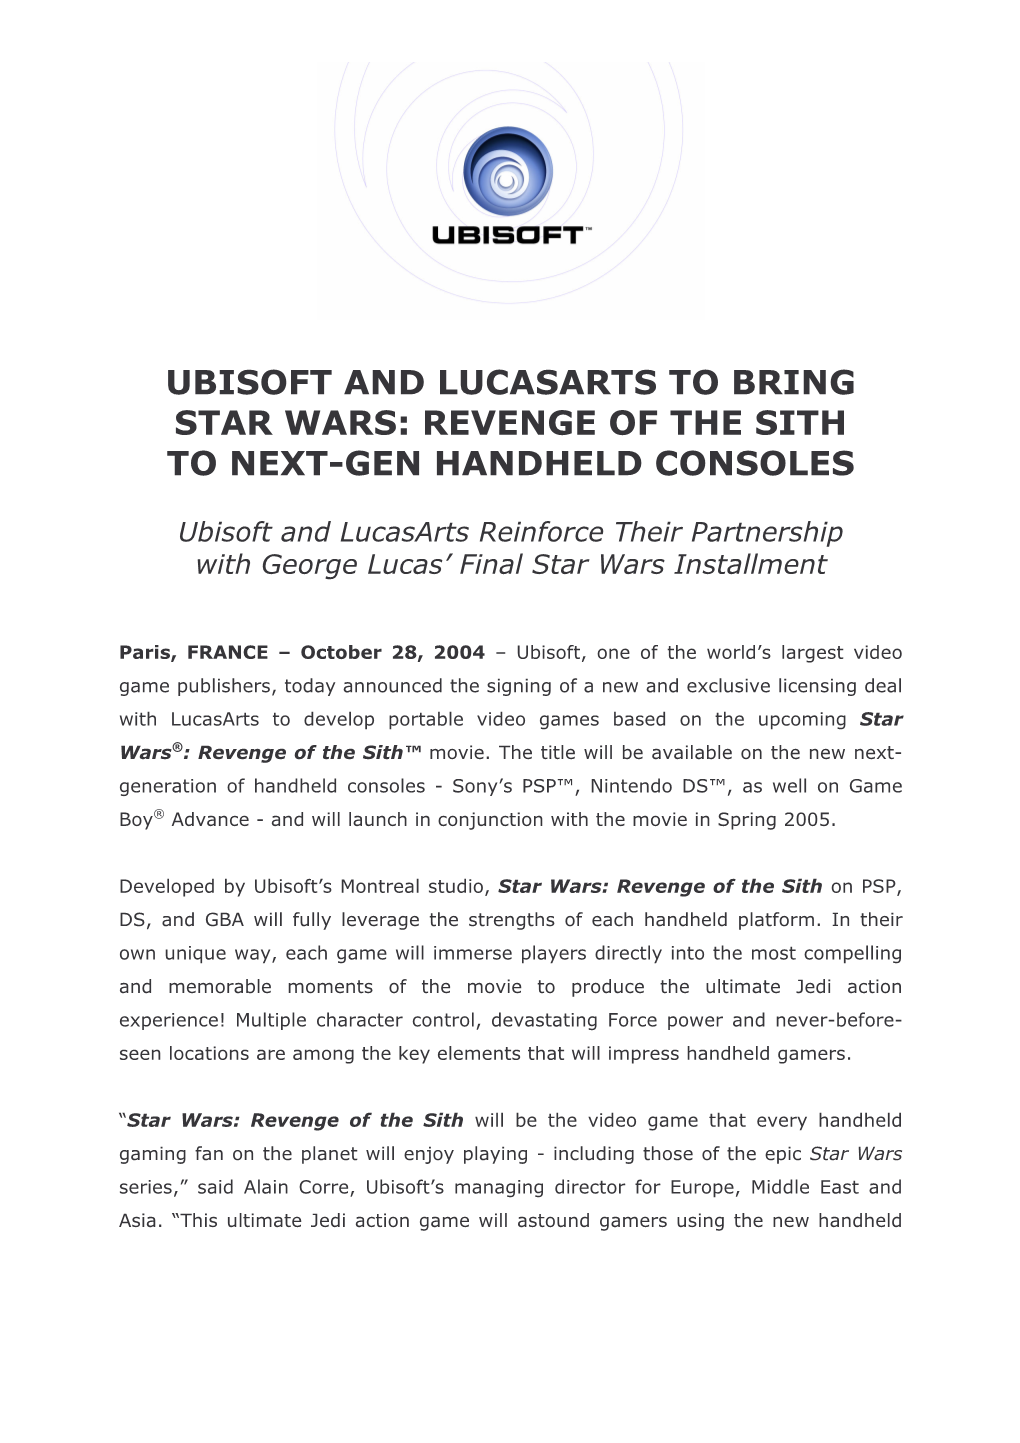 Ubisoft and Lucasarts to Bring Star Wars: Revenge of the Sith to Next-Gen Handheld Consoles